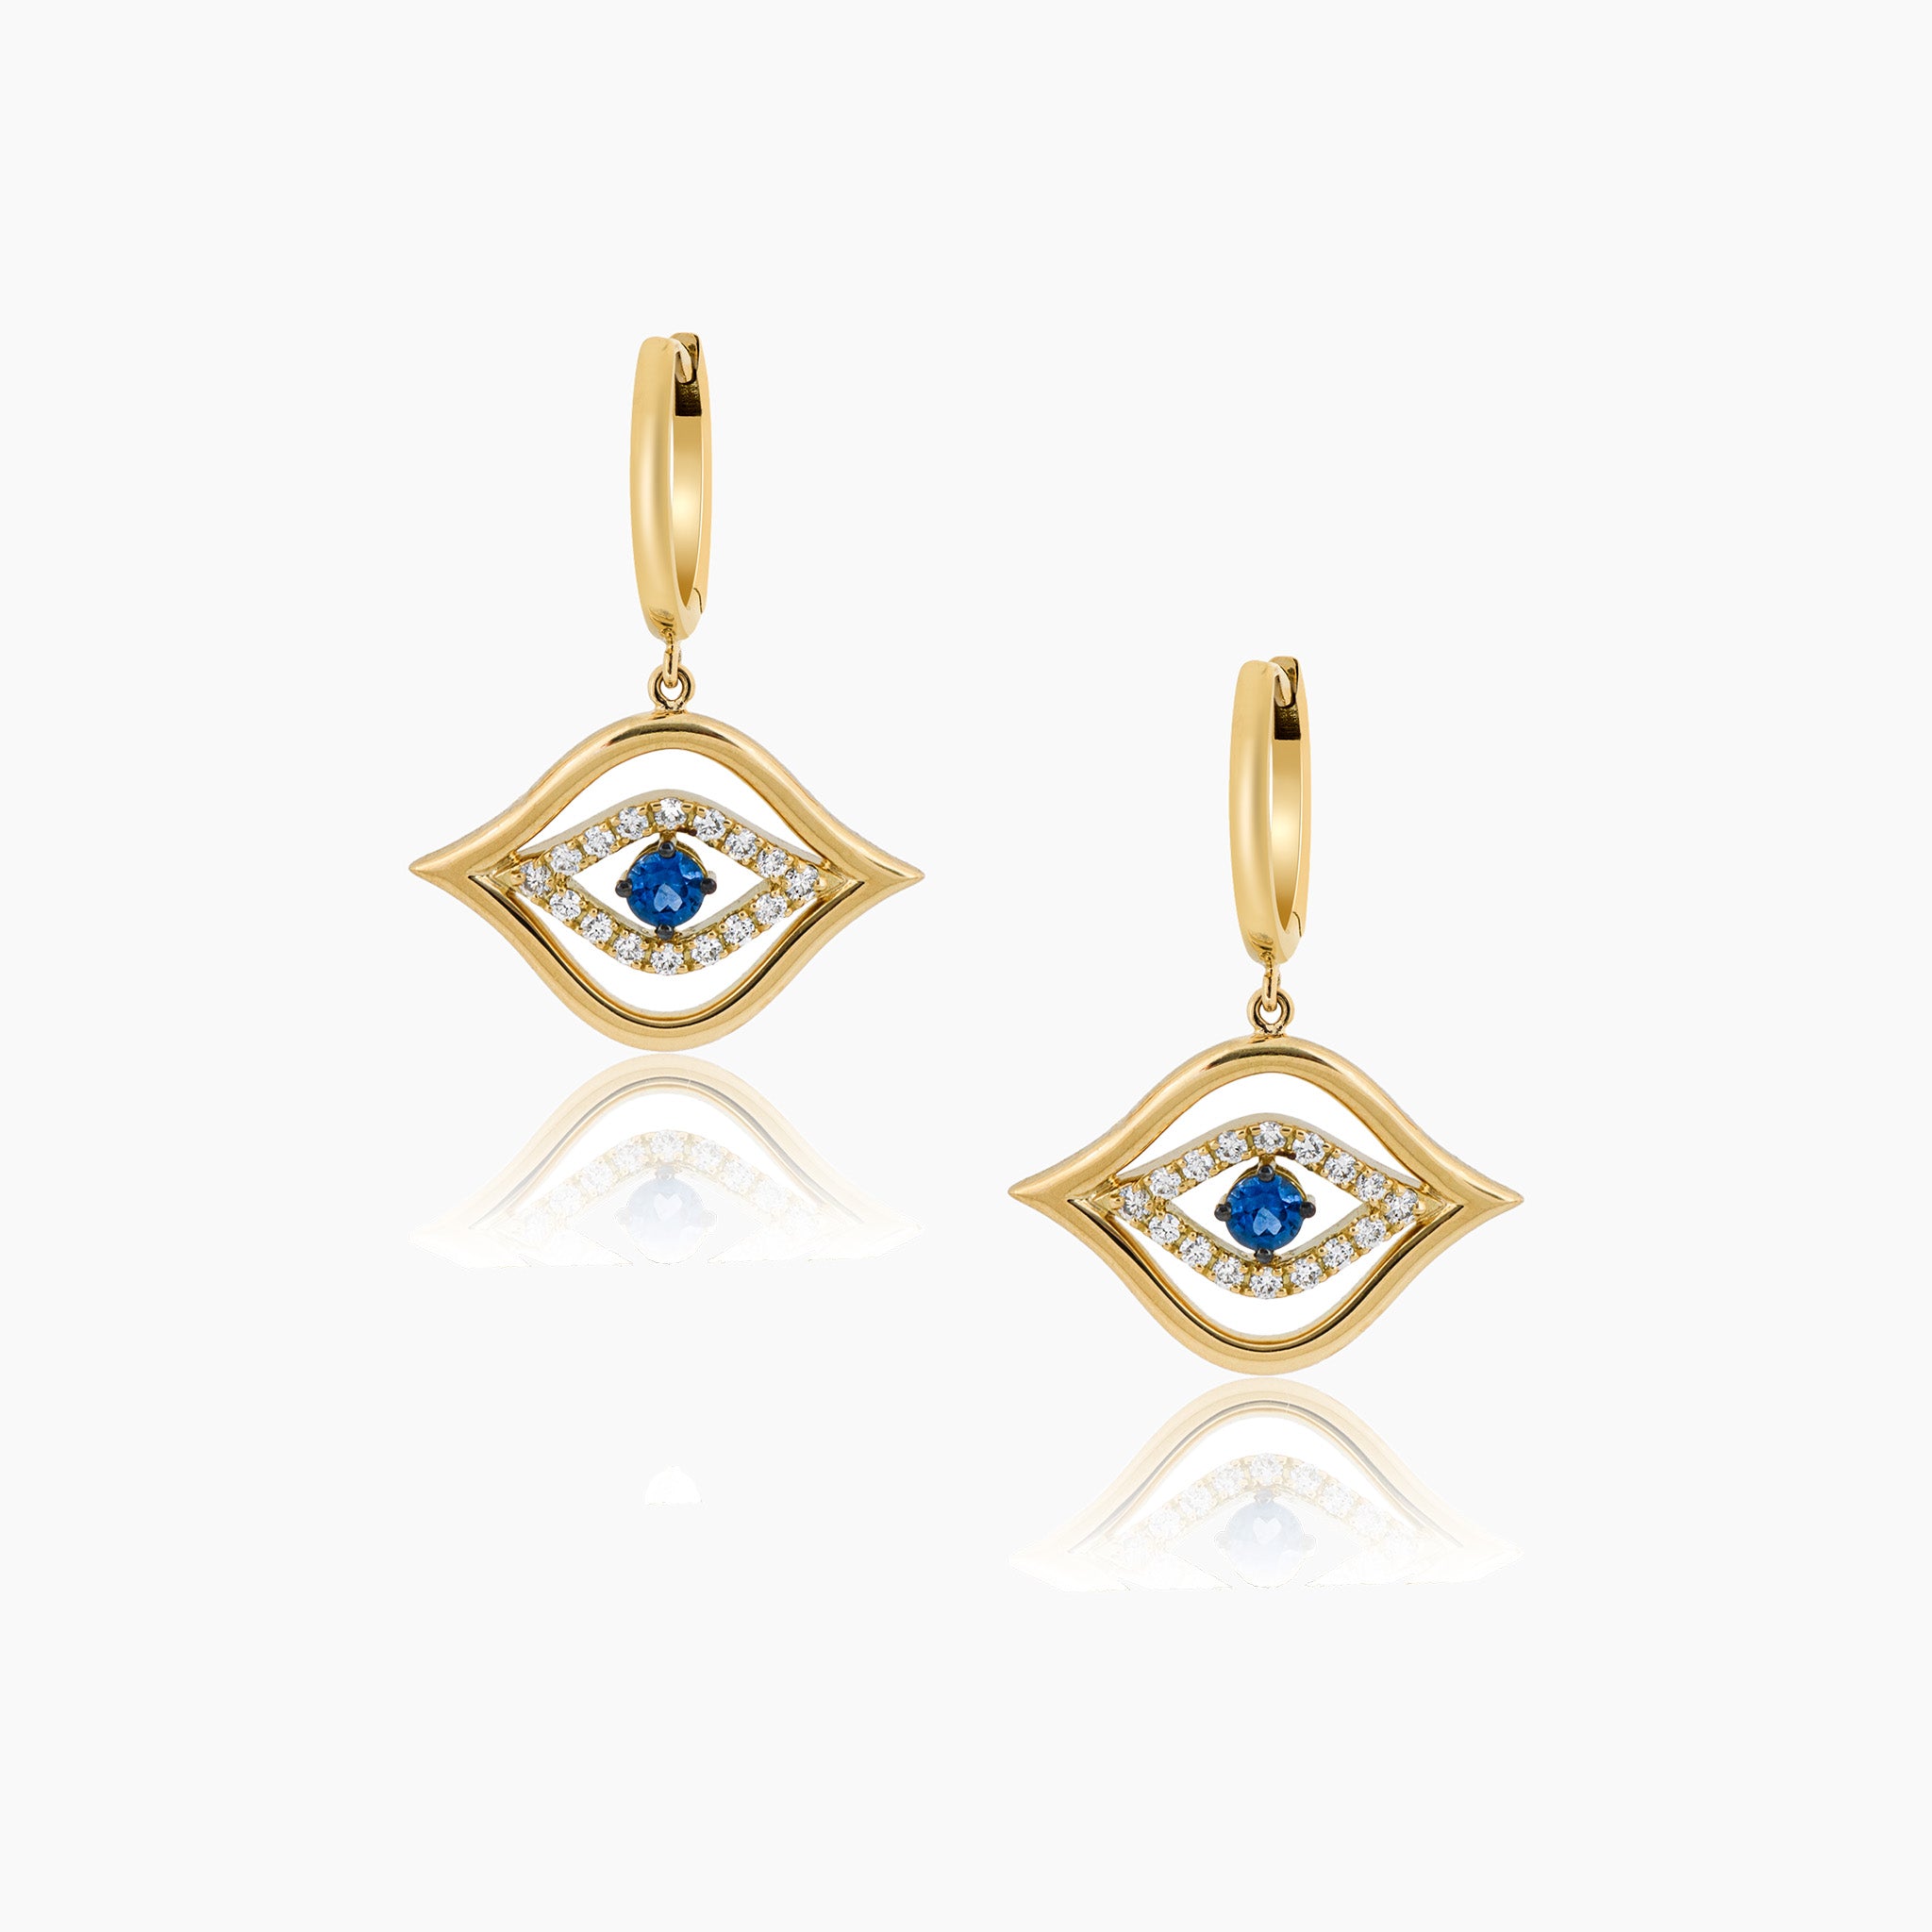 Exquisite fine jewellery featuring stunning diamond and sapphire earrings against an elegant off-white backdrop.